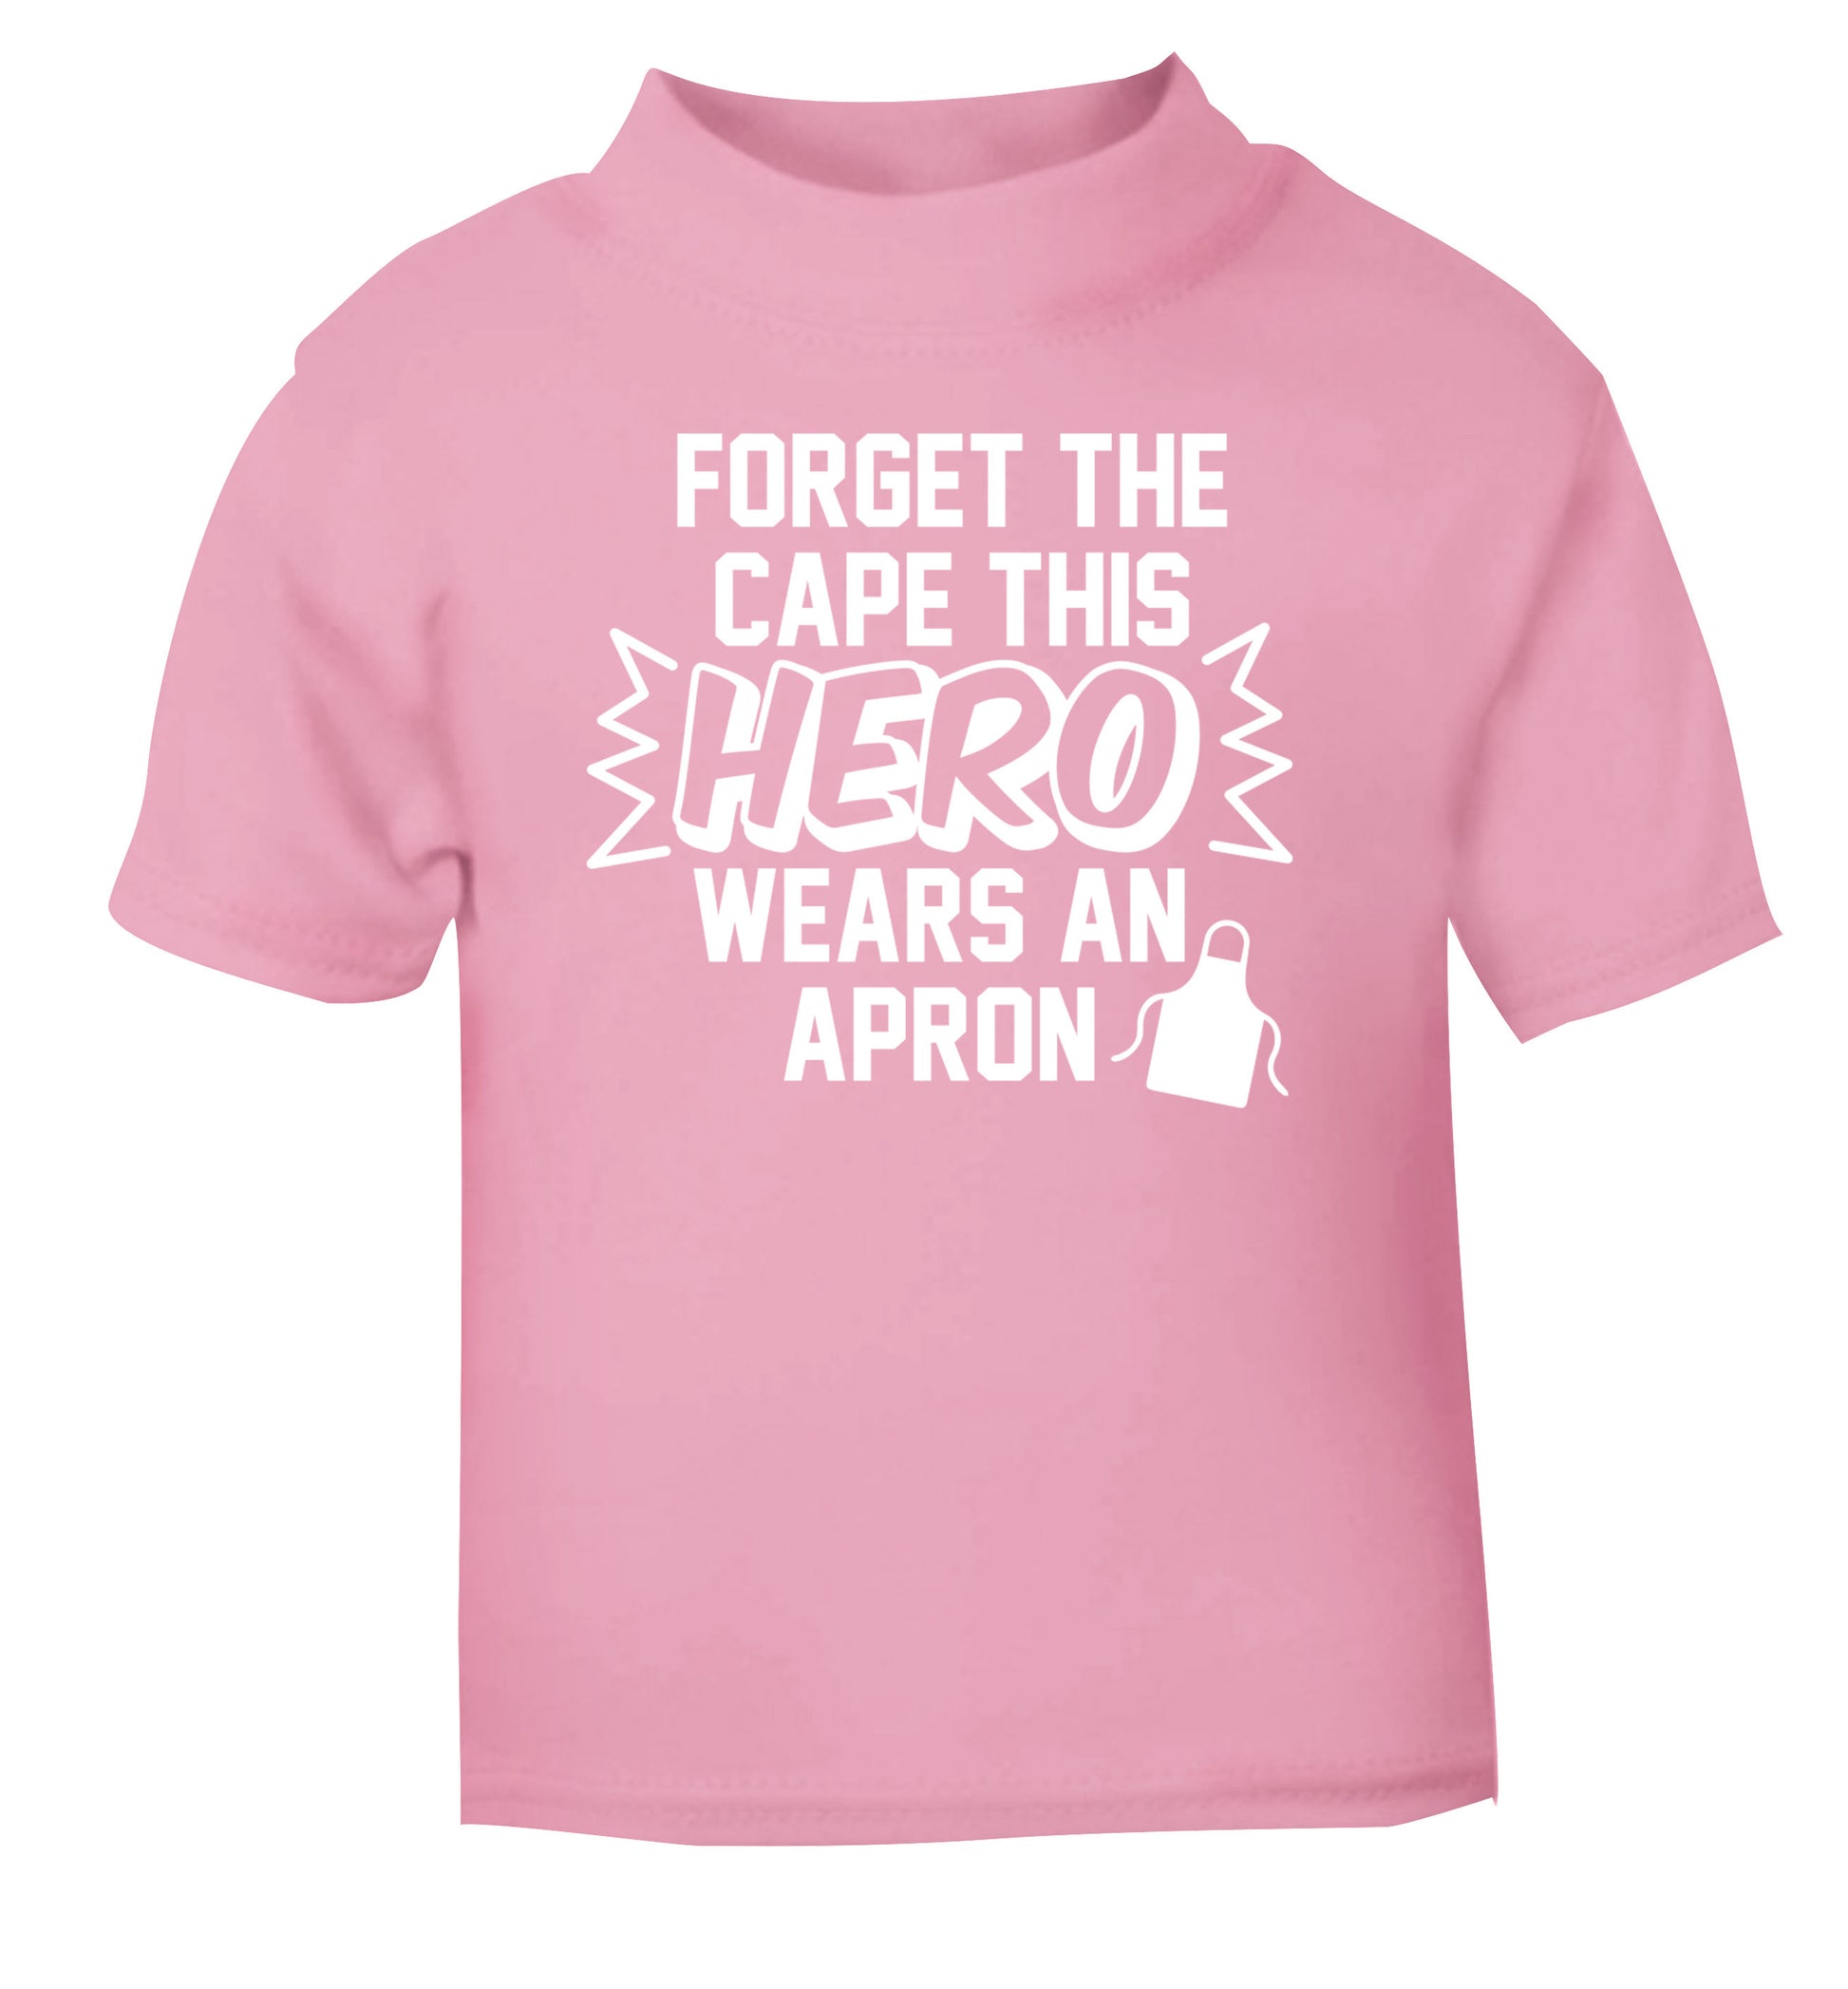 Forget the cape this hero wears an apron light pink Baby Toddler Tshirt 2 Years